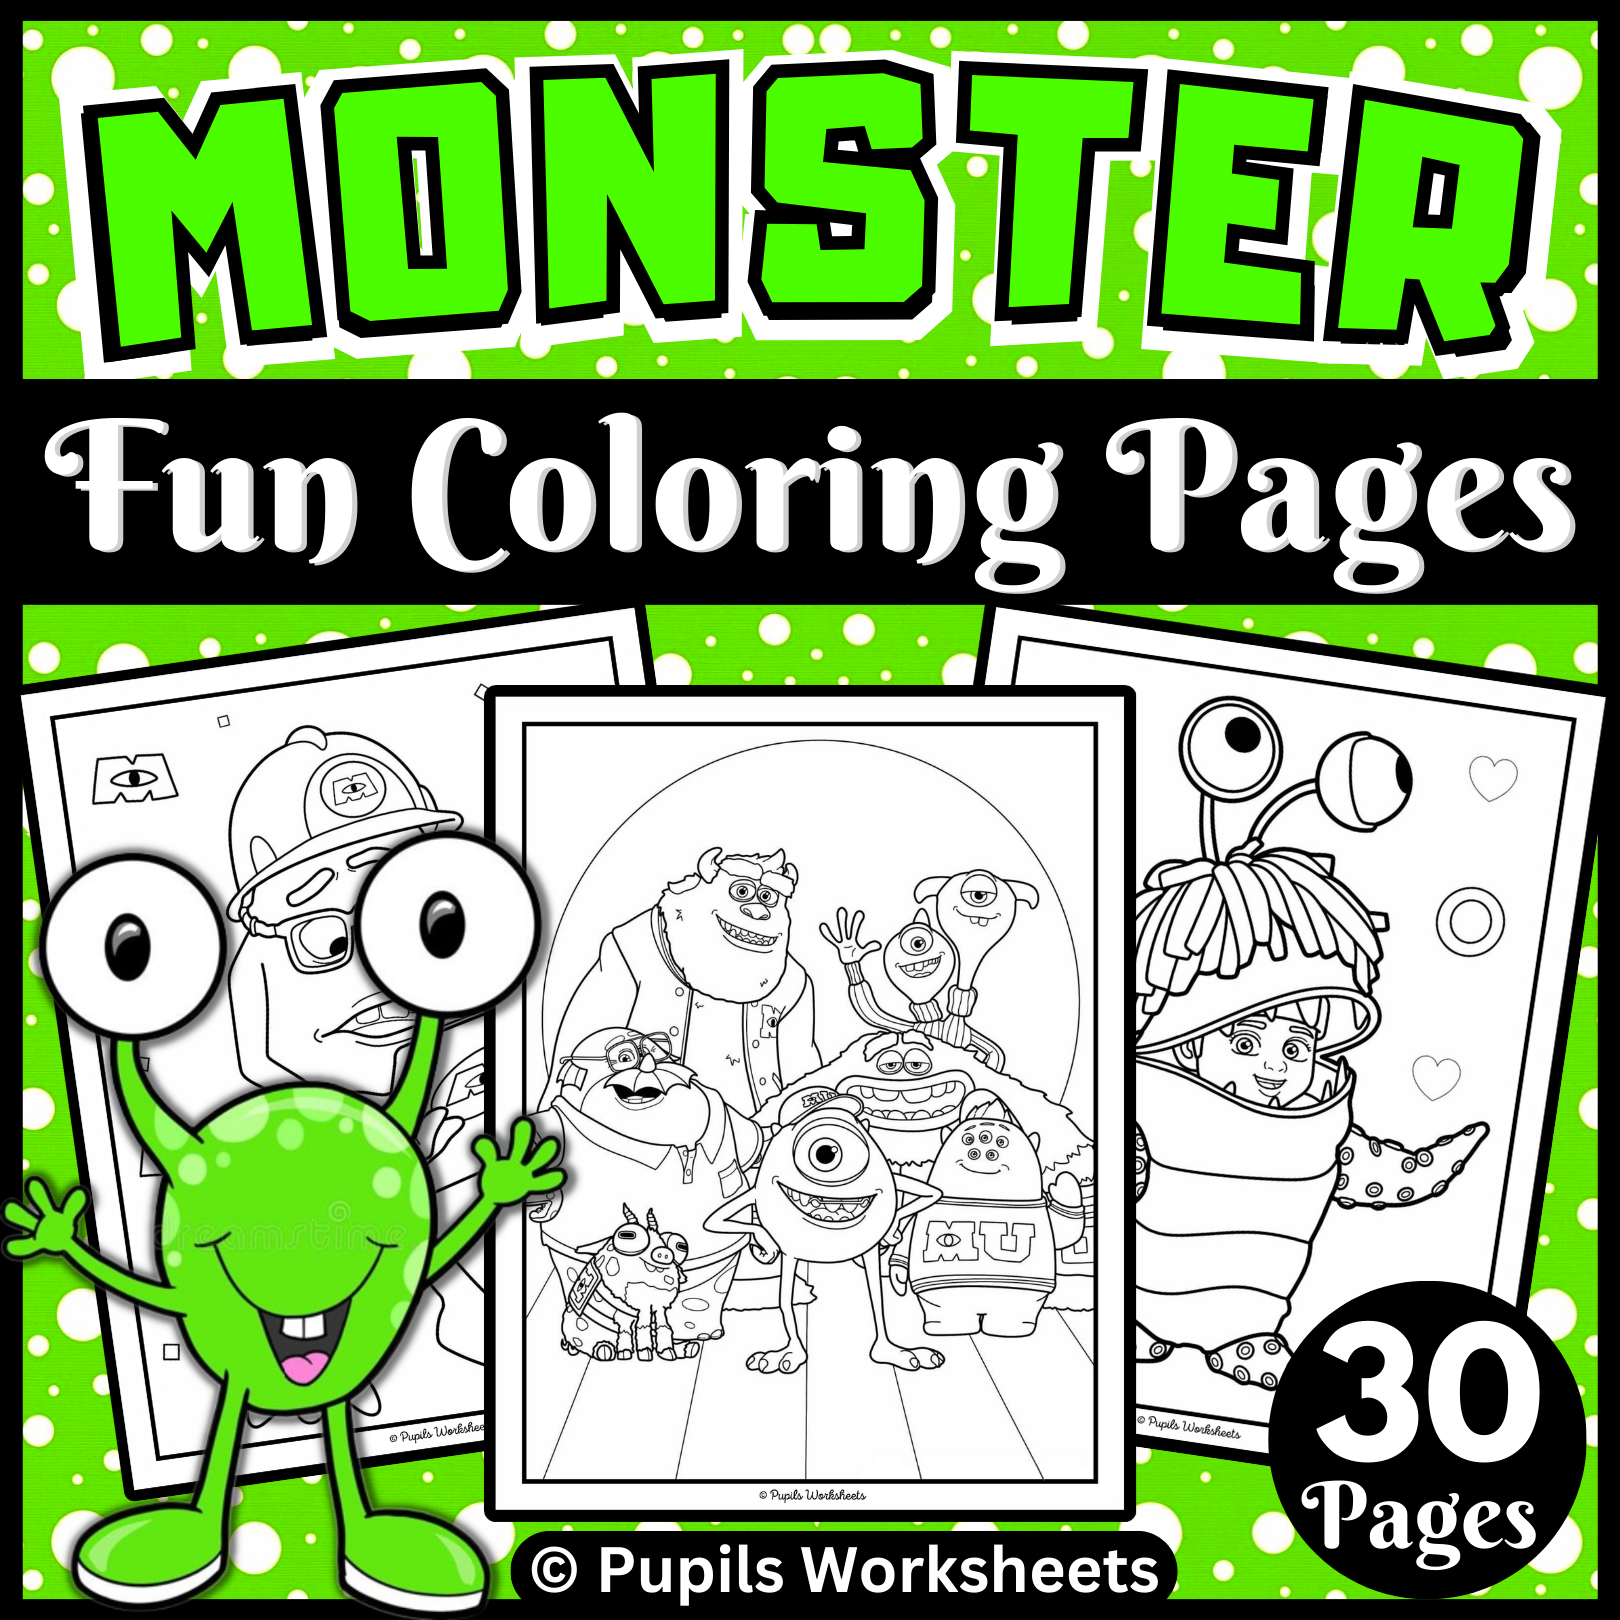 Monsters mindfulness coloring pages i relaxing printable halloween art activity made by teachers